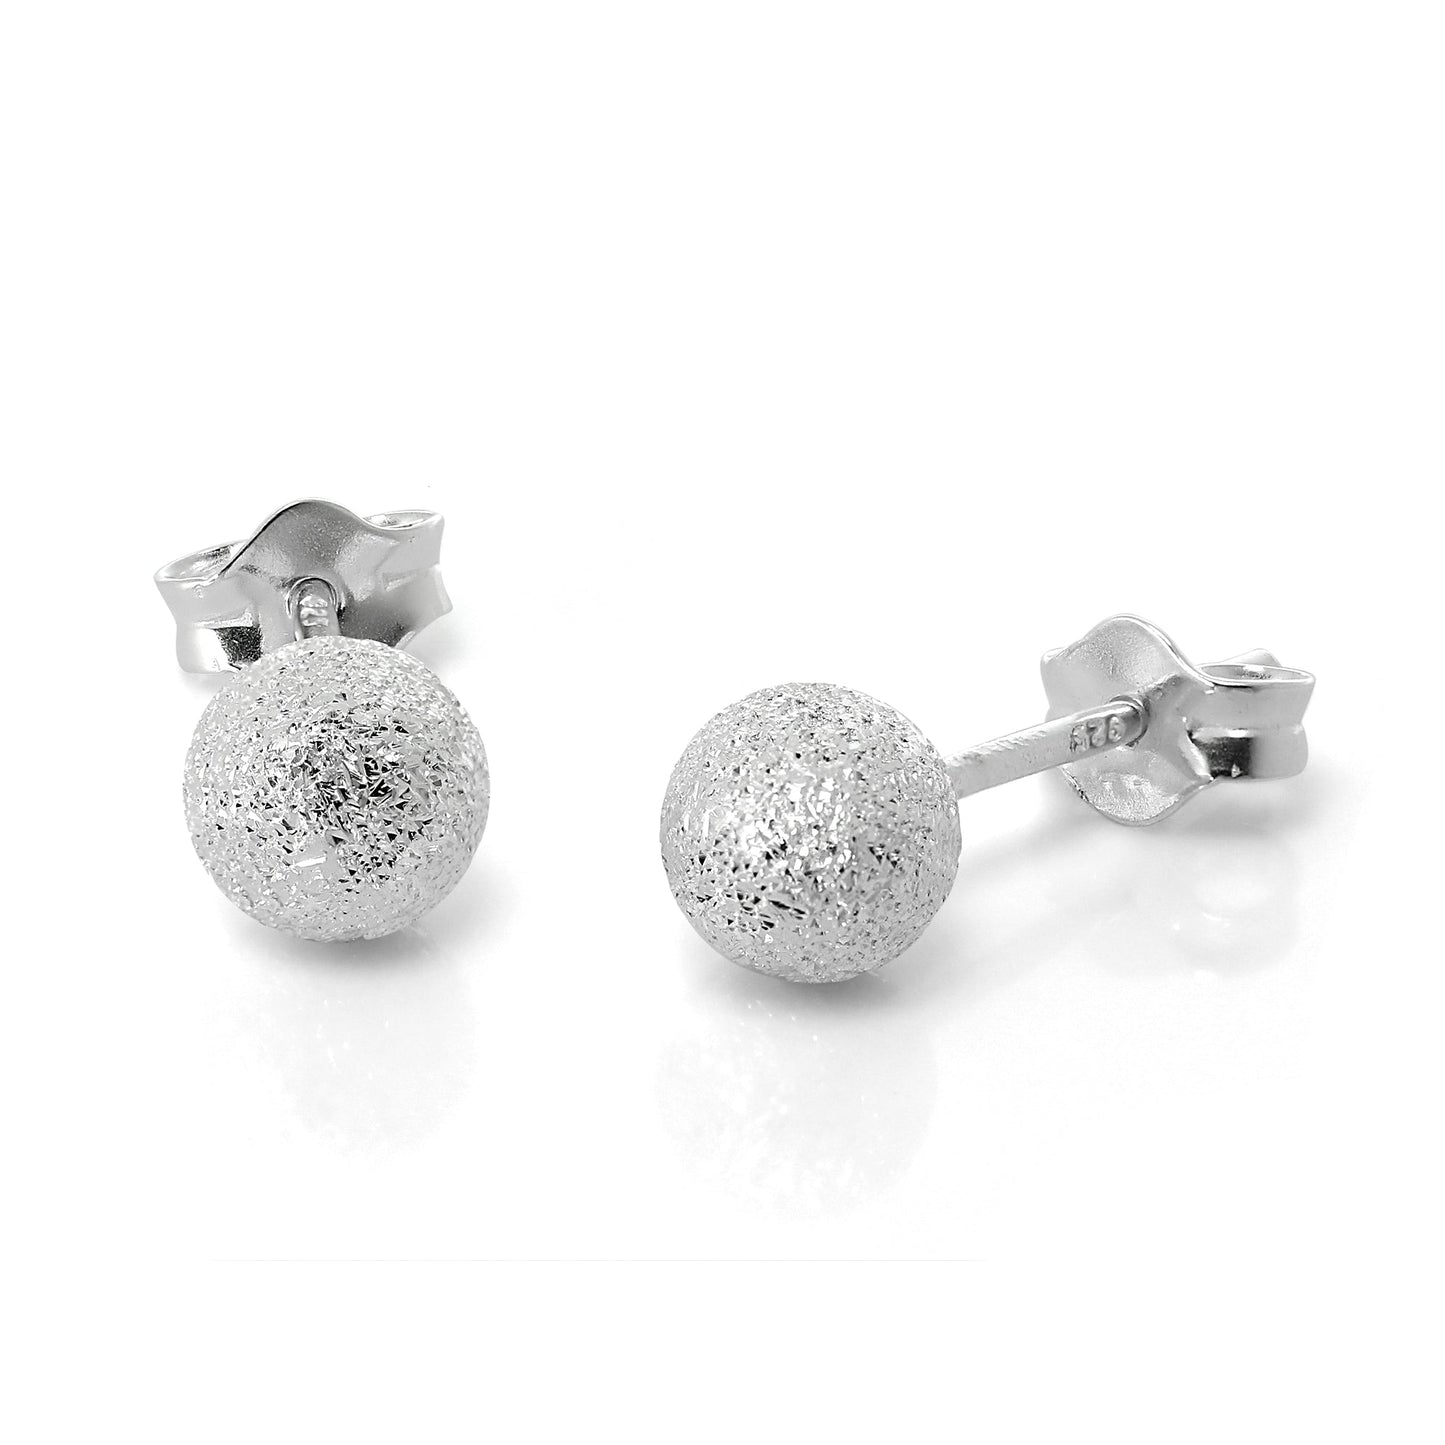 Frosted Sterling Silver Ball Stud Earrings 3mm - 8mm